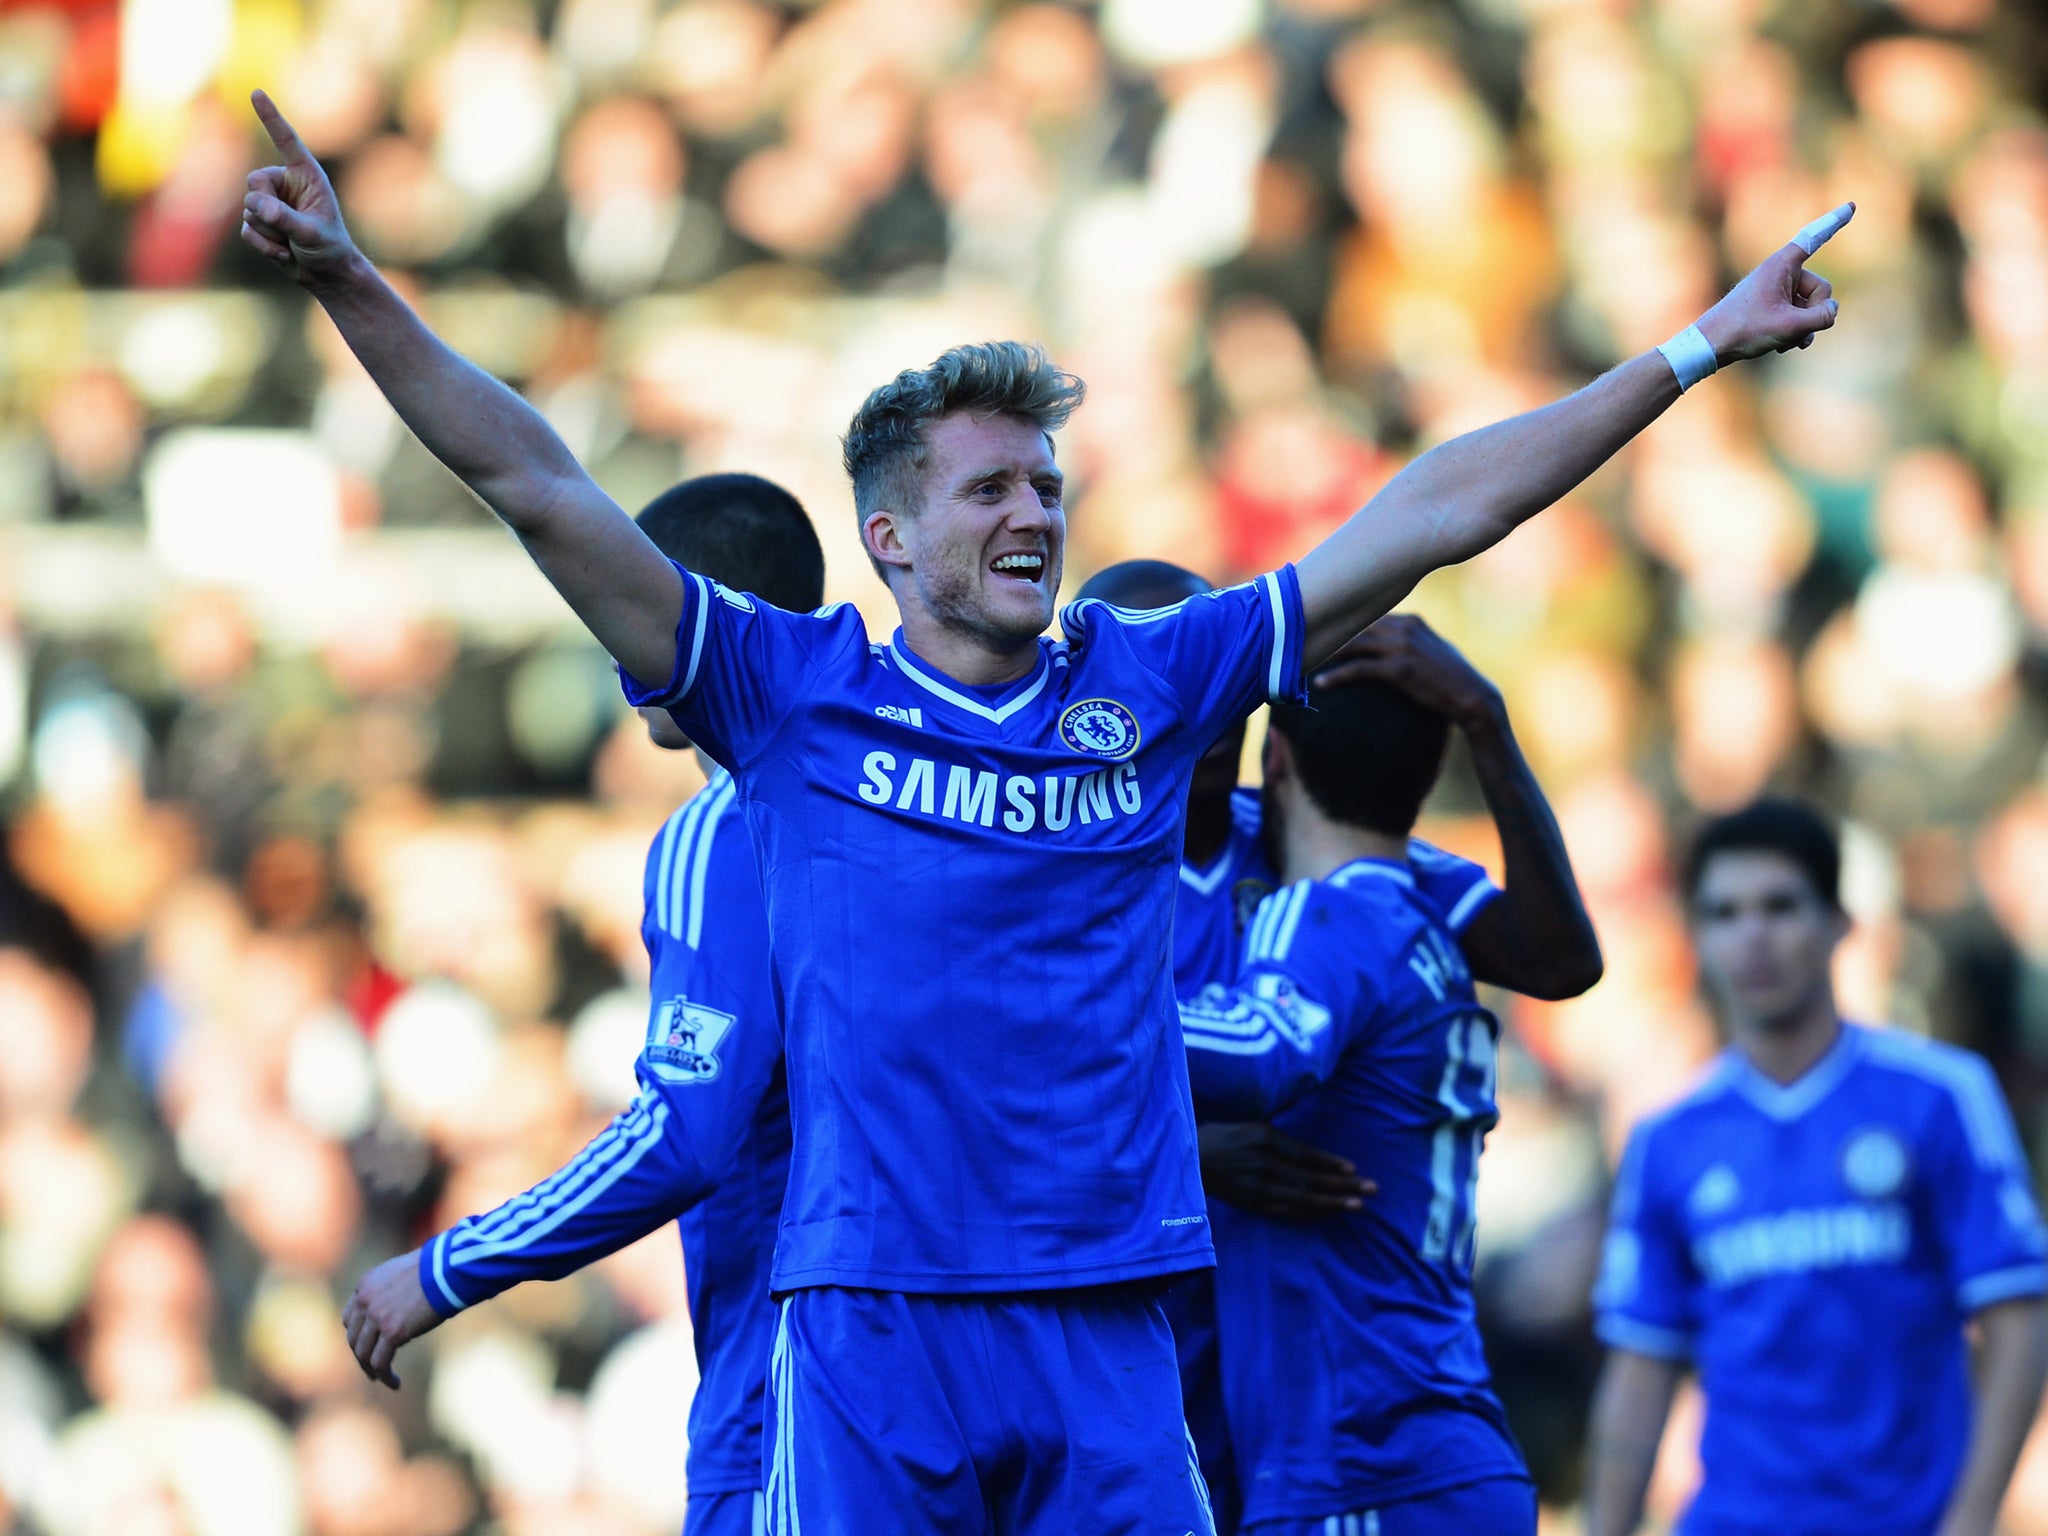 Andre Schurrle celebrates scoring his third goal for Chelsea in their victory over Fulham